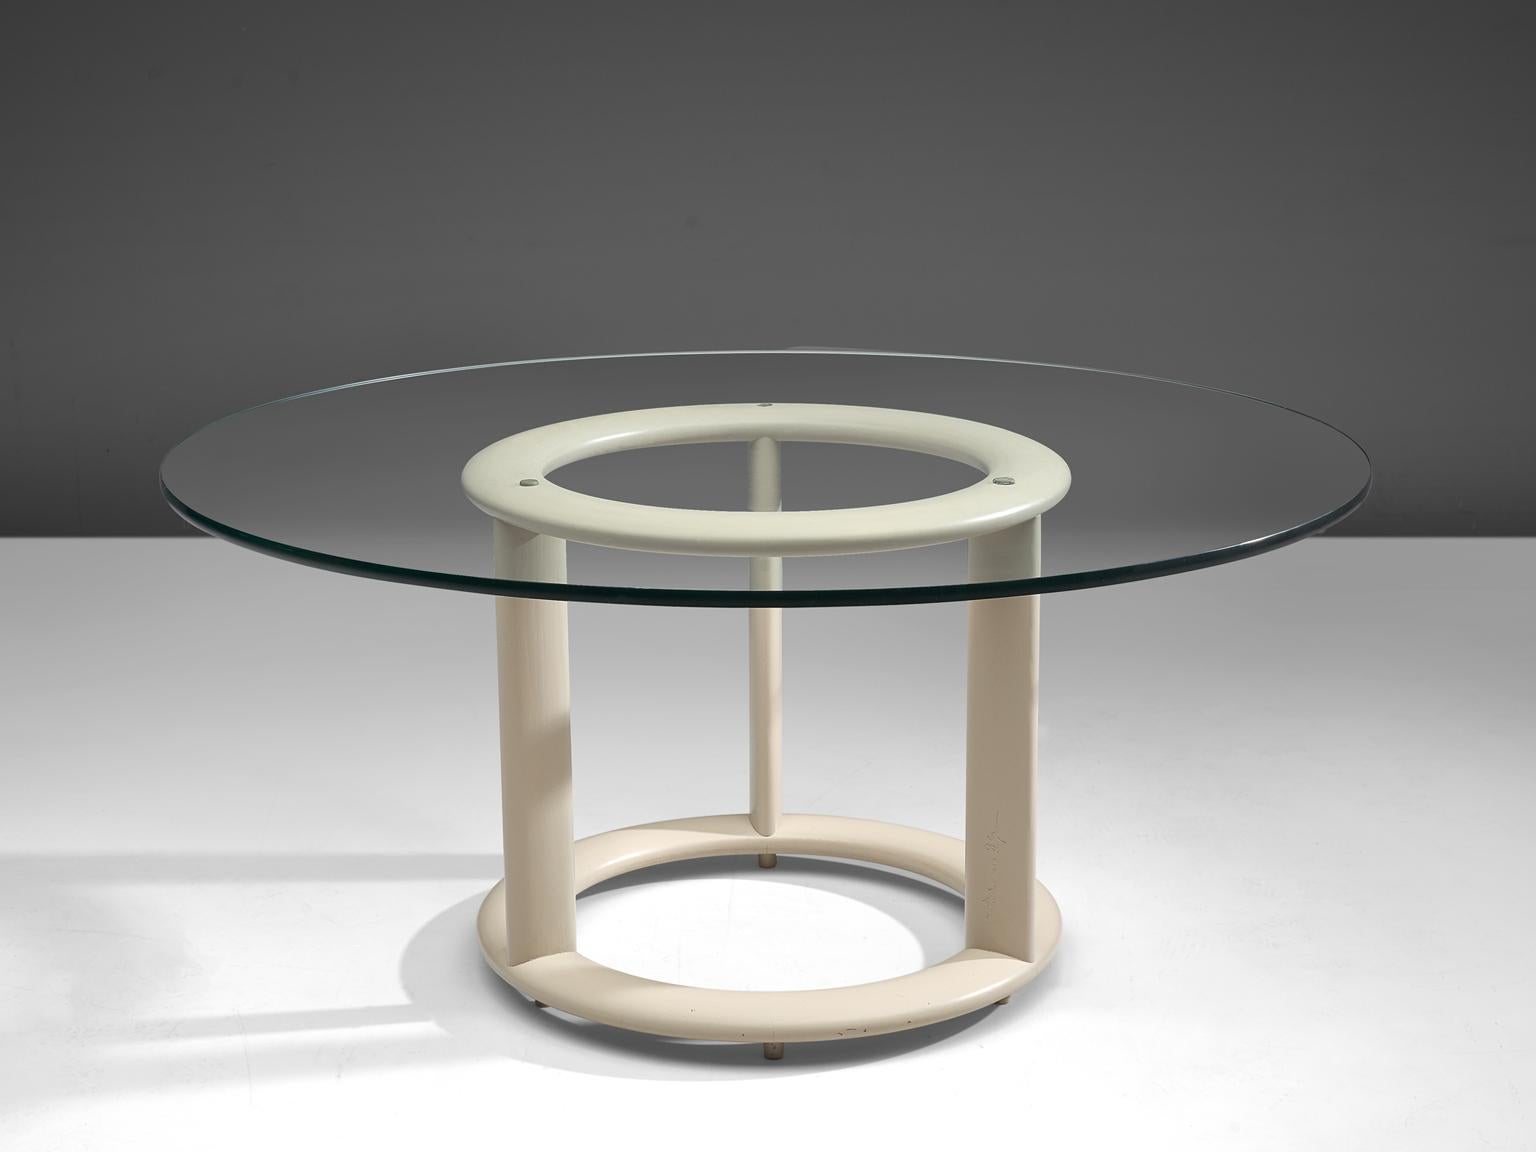 Rosenthal Studio Linie, dining table, glass and painted wood, Germany, 1970s

This postmodern centre table with white lacquered circular foot features a round glass top. The model is very minimalistic, featuring a base with only the necessary